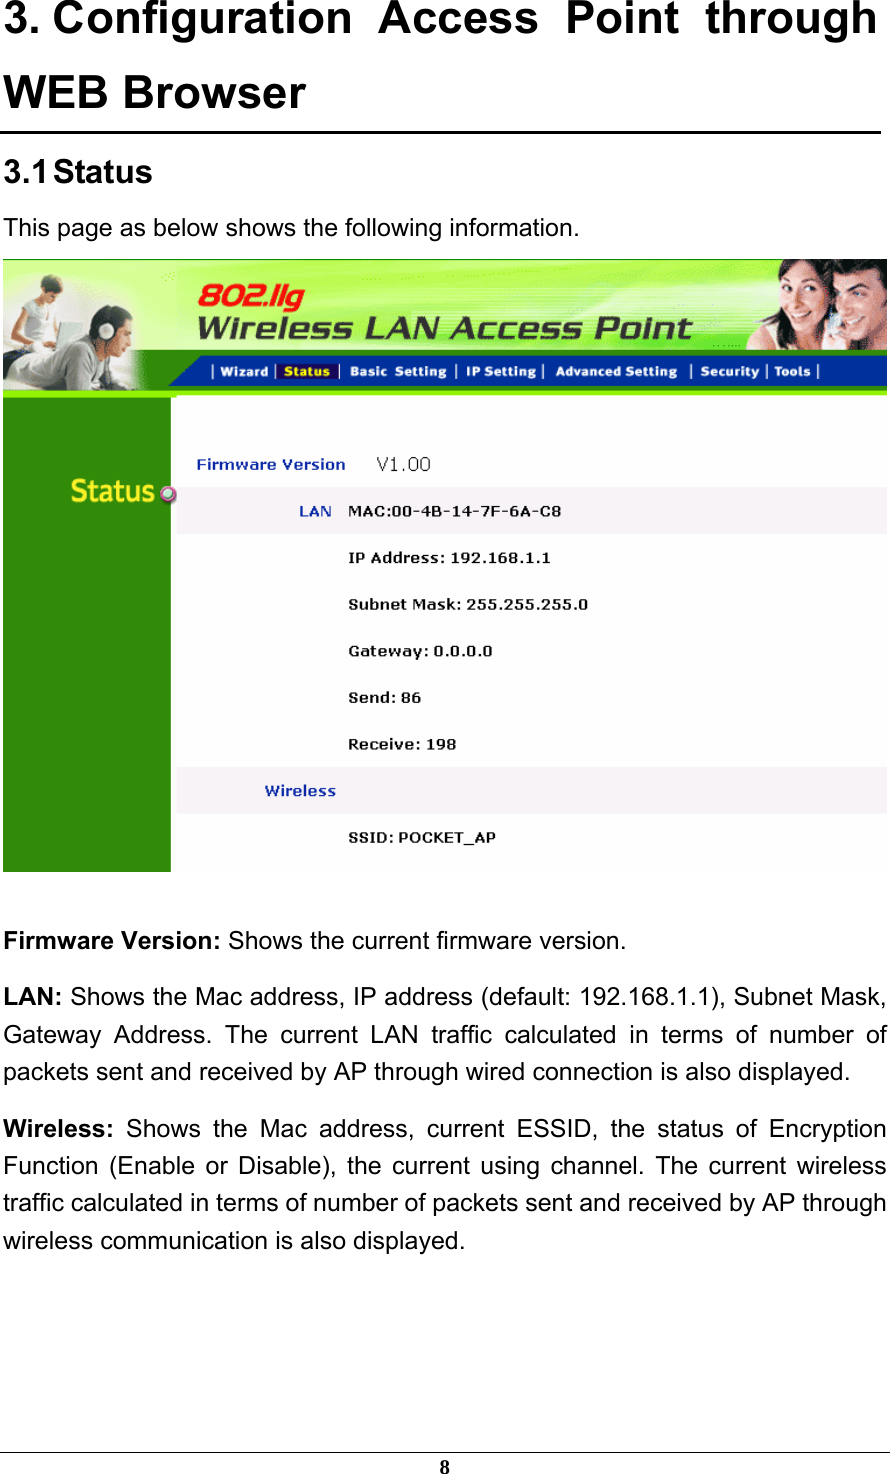 3. Configuration Access Point through WEB Browser 3.1 Status This page as below shows the following information.   Firmware Version: Shows the current firmware version. LAN: Shows the Mac address, IP address (default: 192.168.1.1), Subnet Mask, Gateway Address. The current LAN traffic calculated in terms of number of packets sent and received by AP through wired connection is also displayed. Wireless:  Shows the Mac address, current ESSID, the status of Encryption Function (Enable or Disable), the current using channel. The current wireless traffic calculated in terms of number of packets sent and received by AP through wireless communication is also displayed.    8 